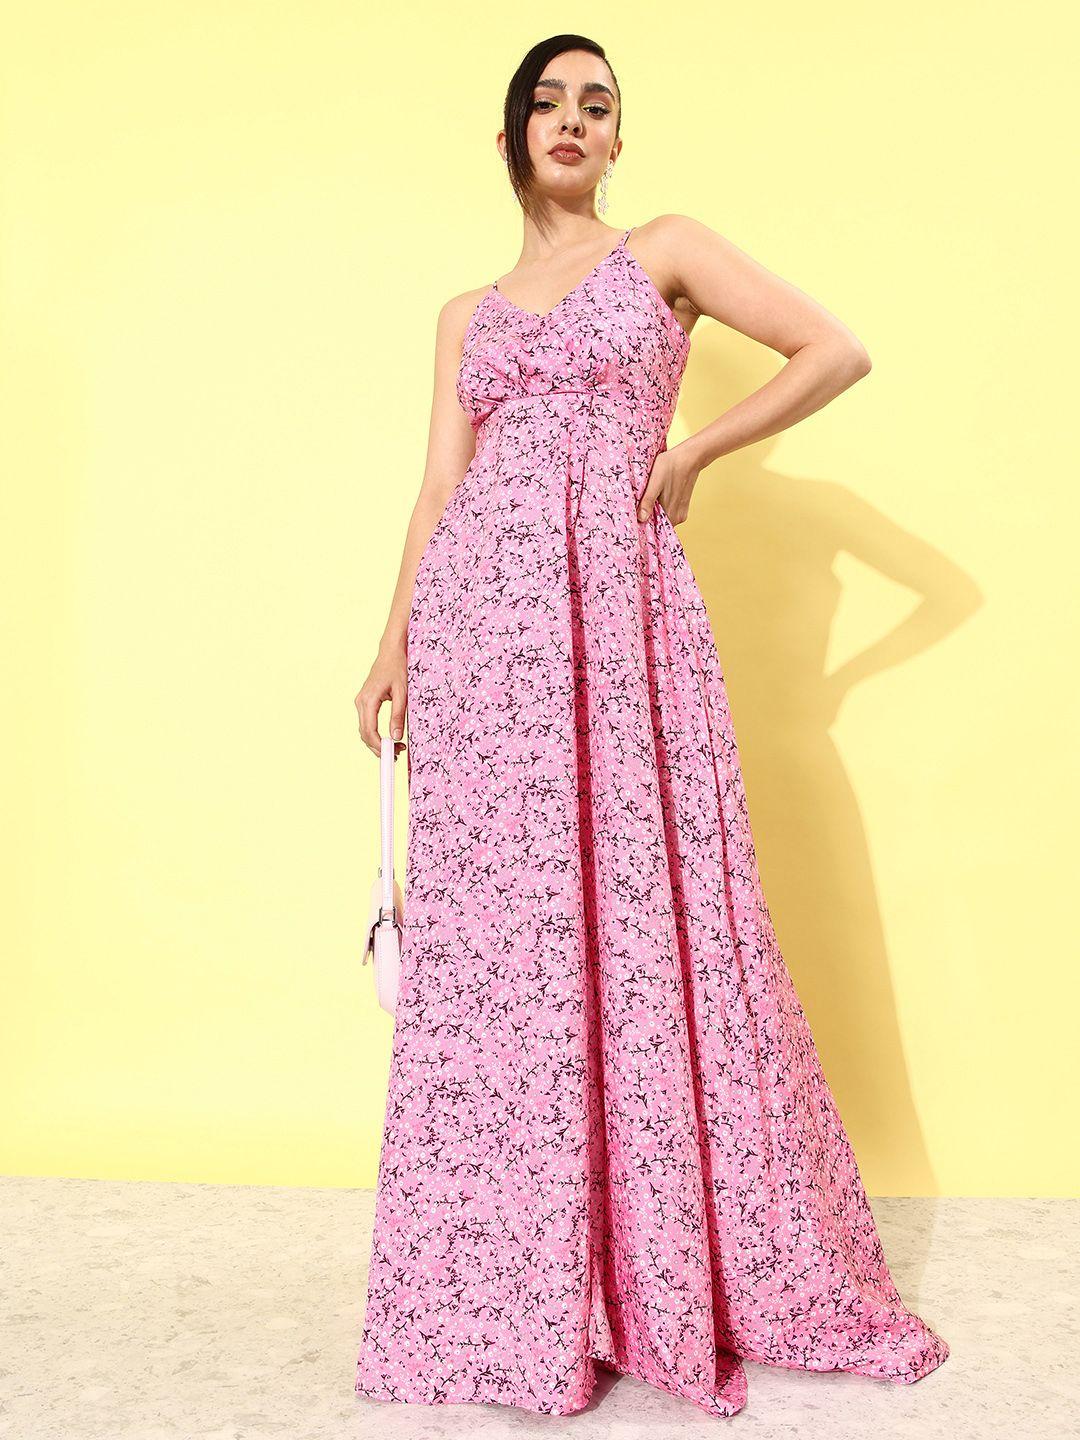 dressberry blossom pink vacay chill sundress floral print maxi dress